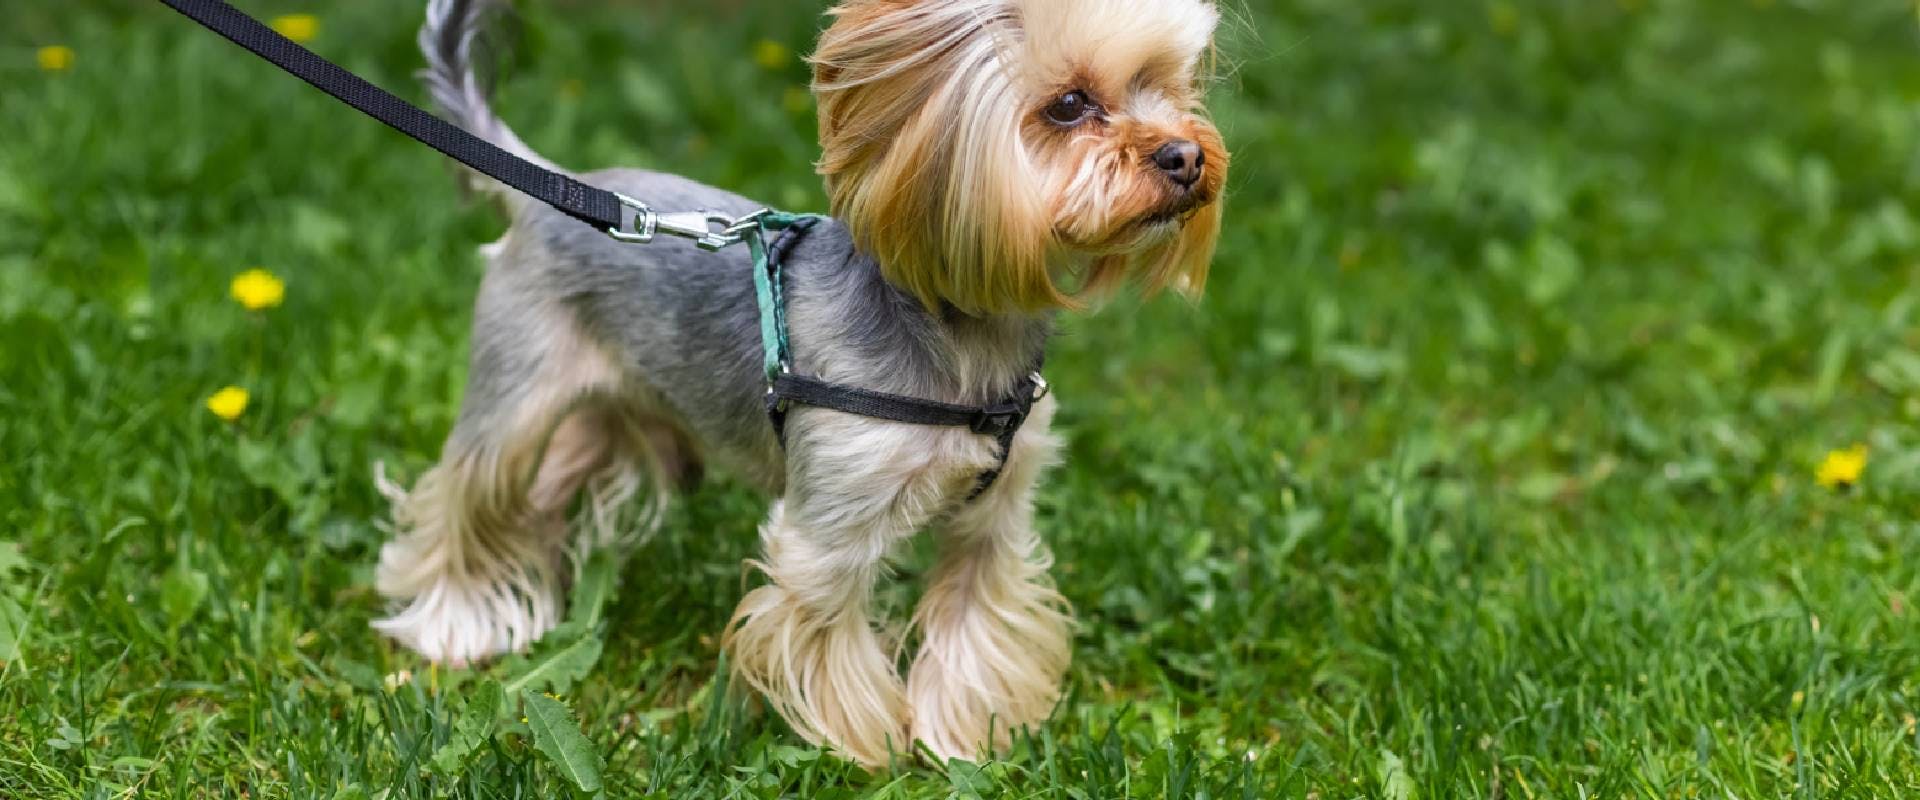 Yorkie with flared hair